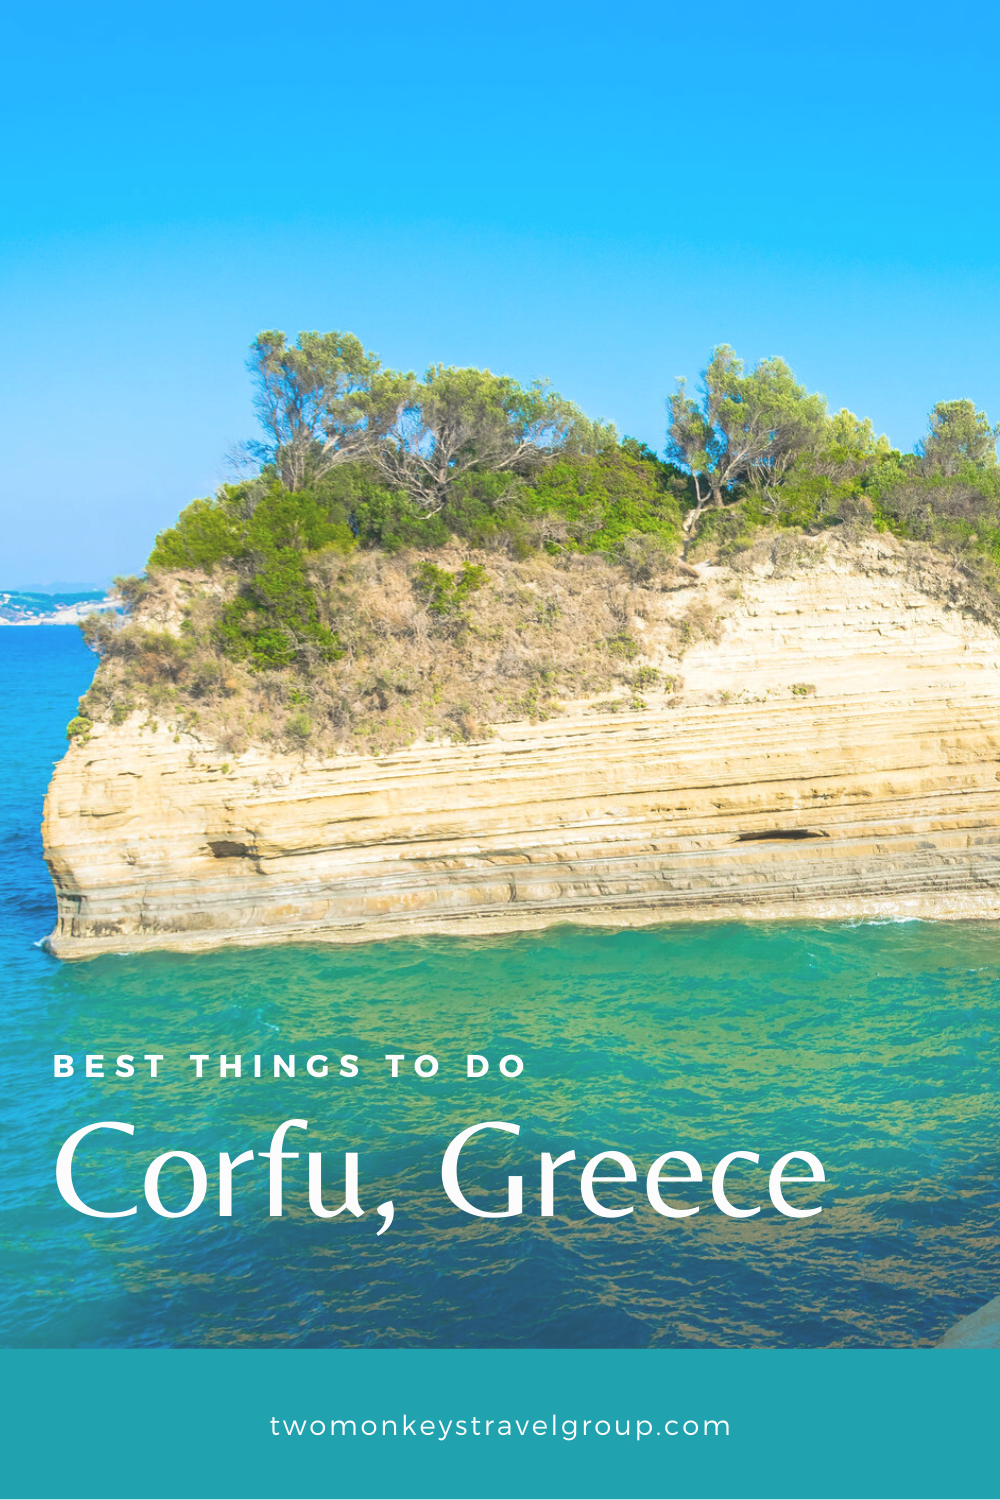 10 Best Things to do in Corfu, Greece